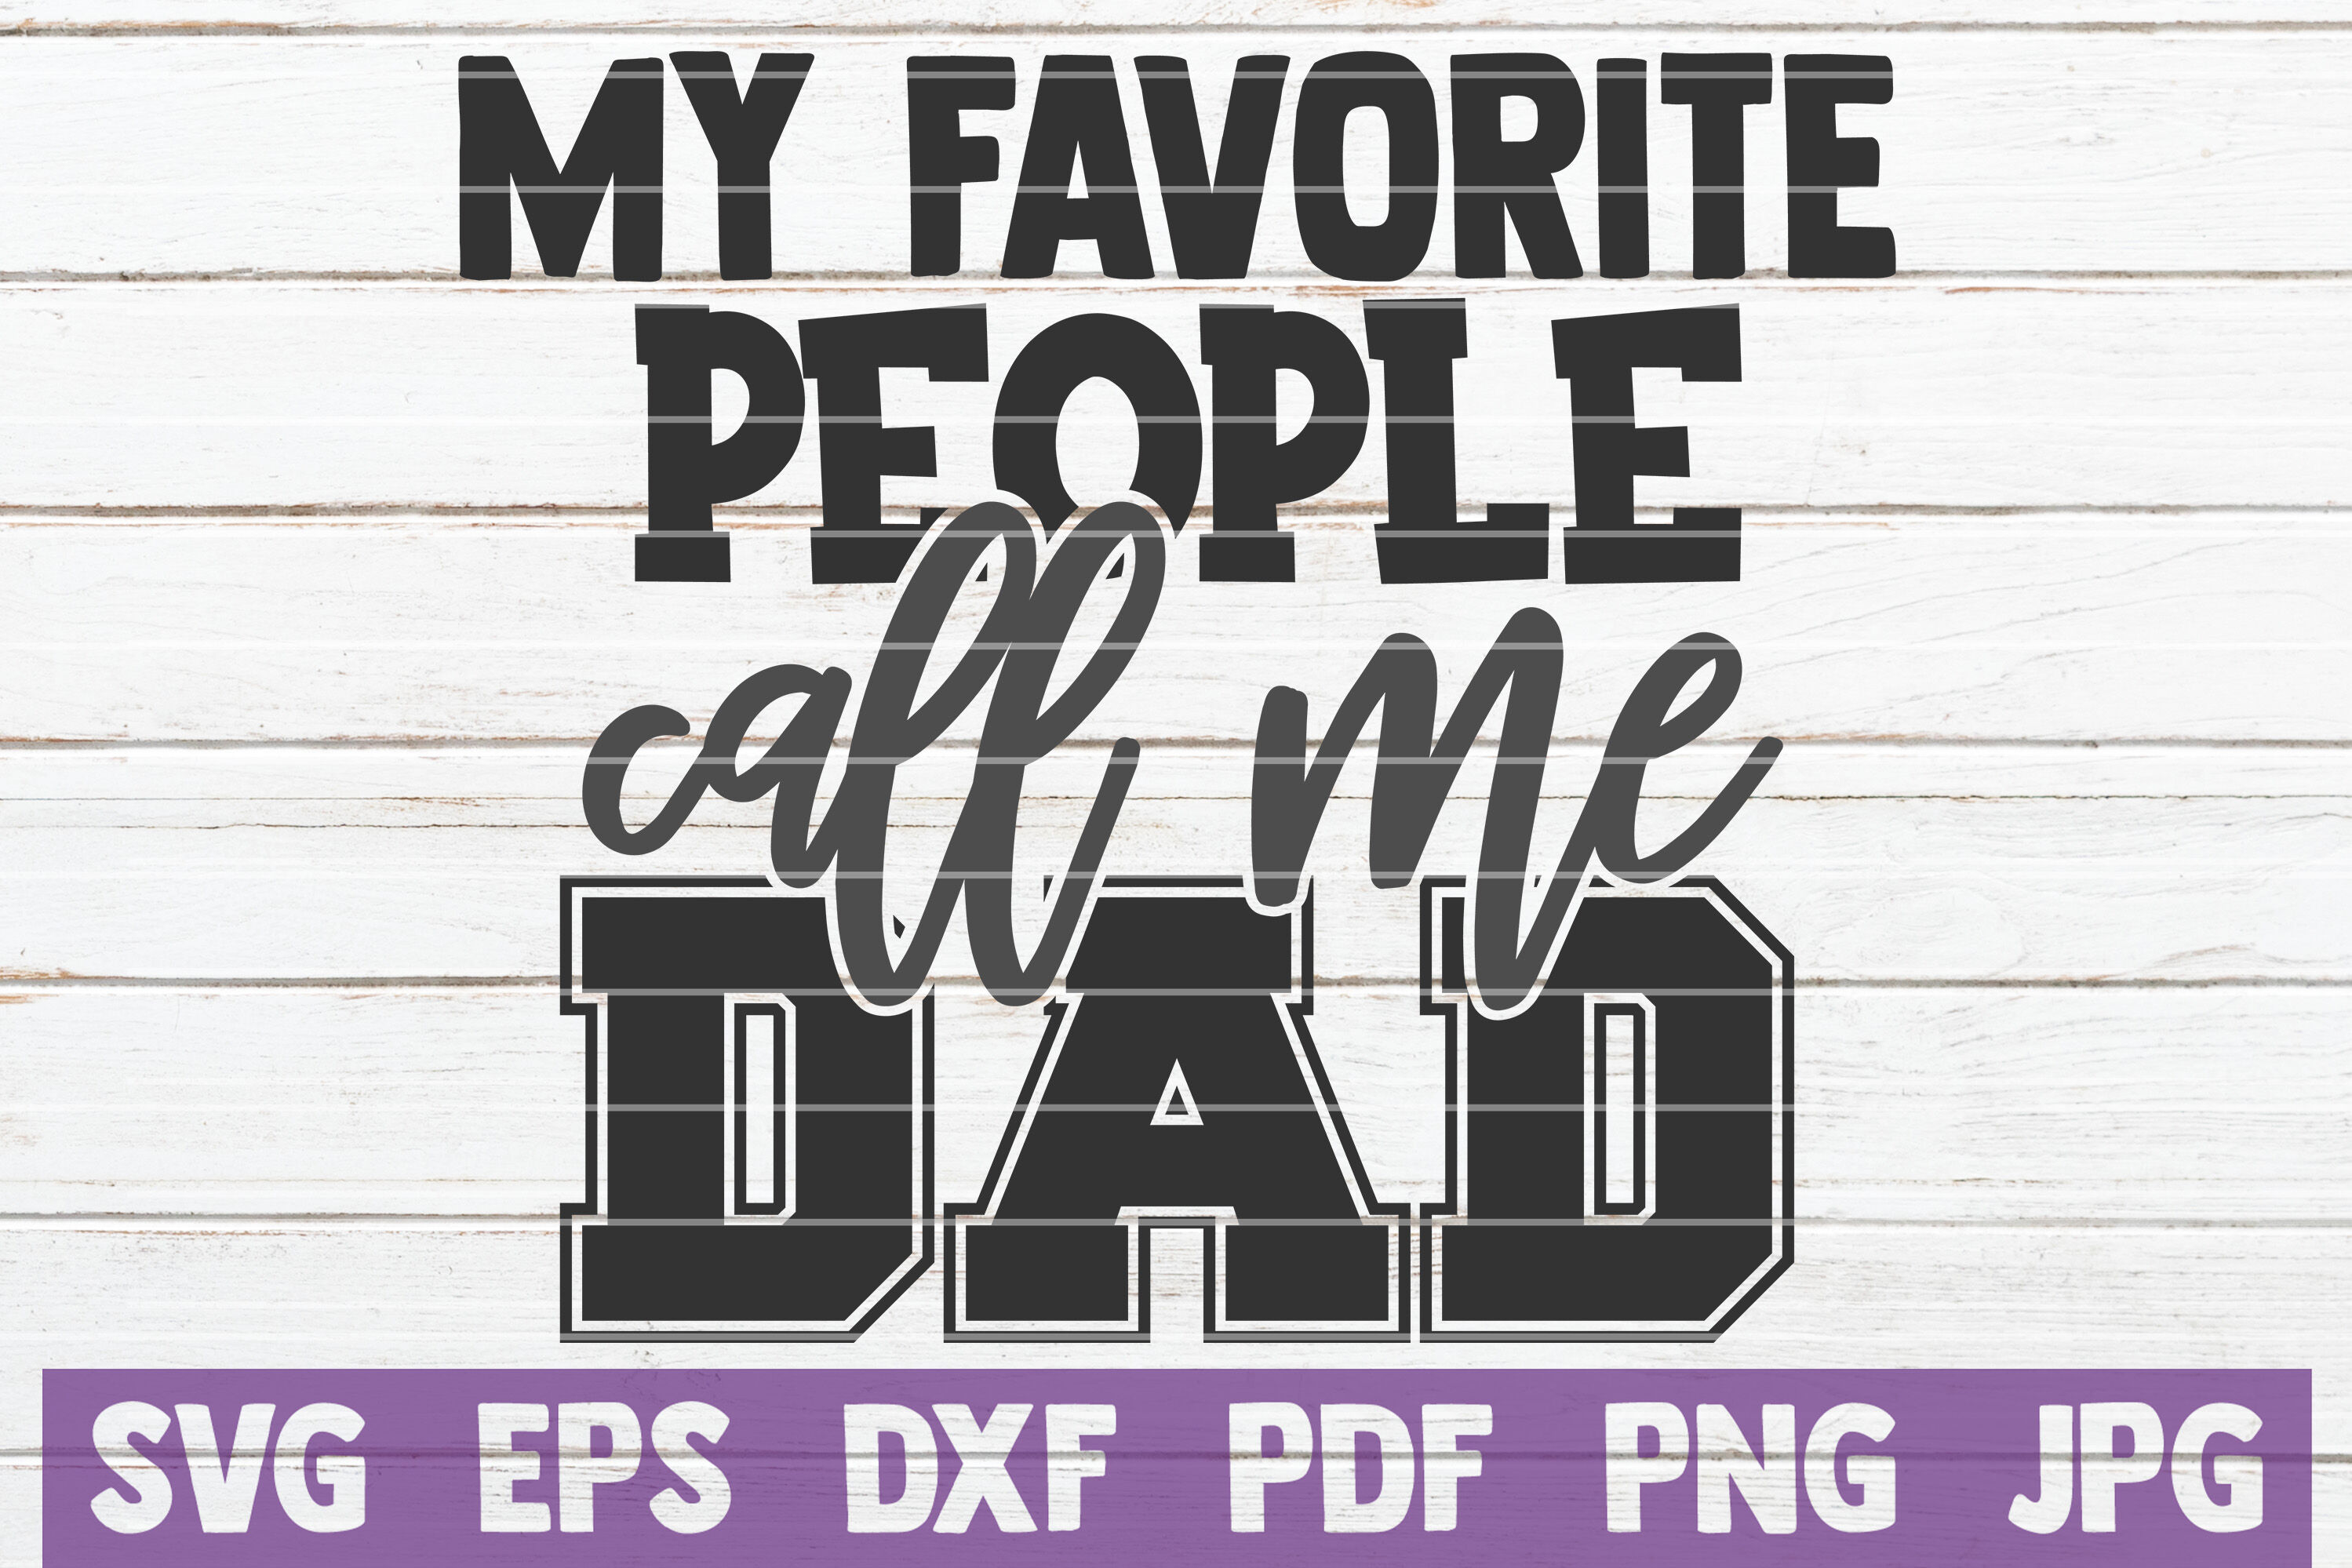 Download Dad SVG Bundle | SVG Cut Files By MintyMarshmallows ...